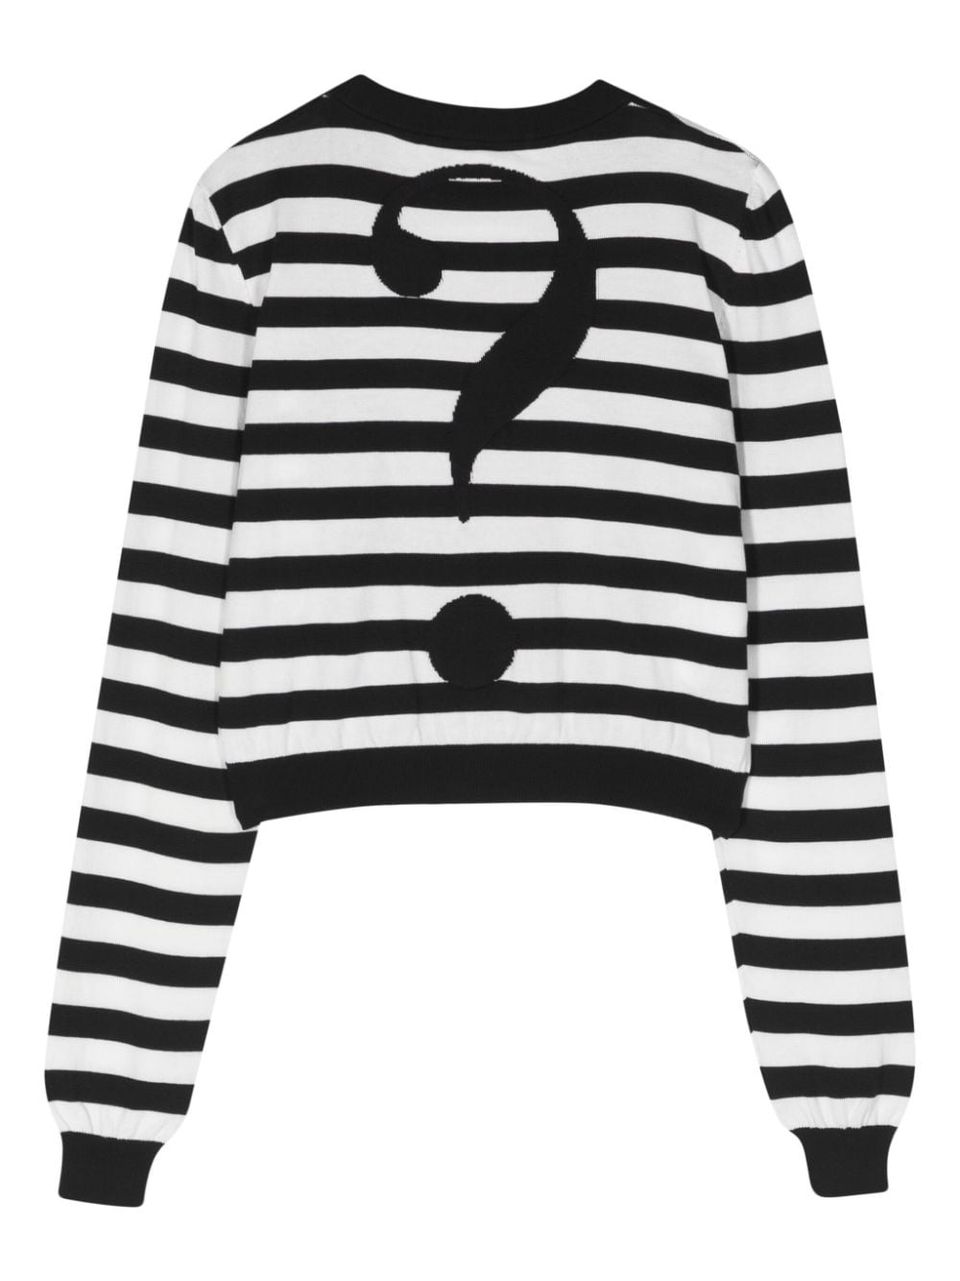 Cardigan in cotton with striped pattern and question mark detail